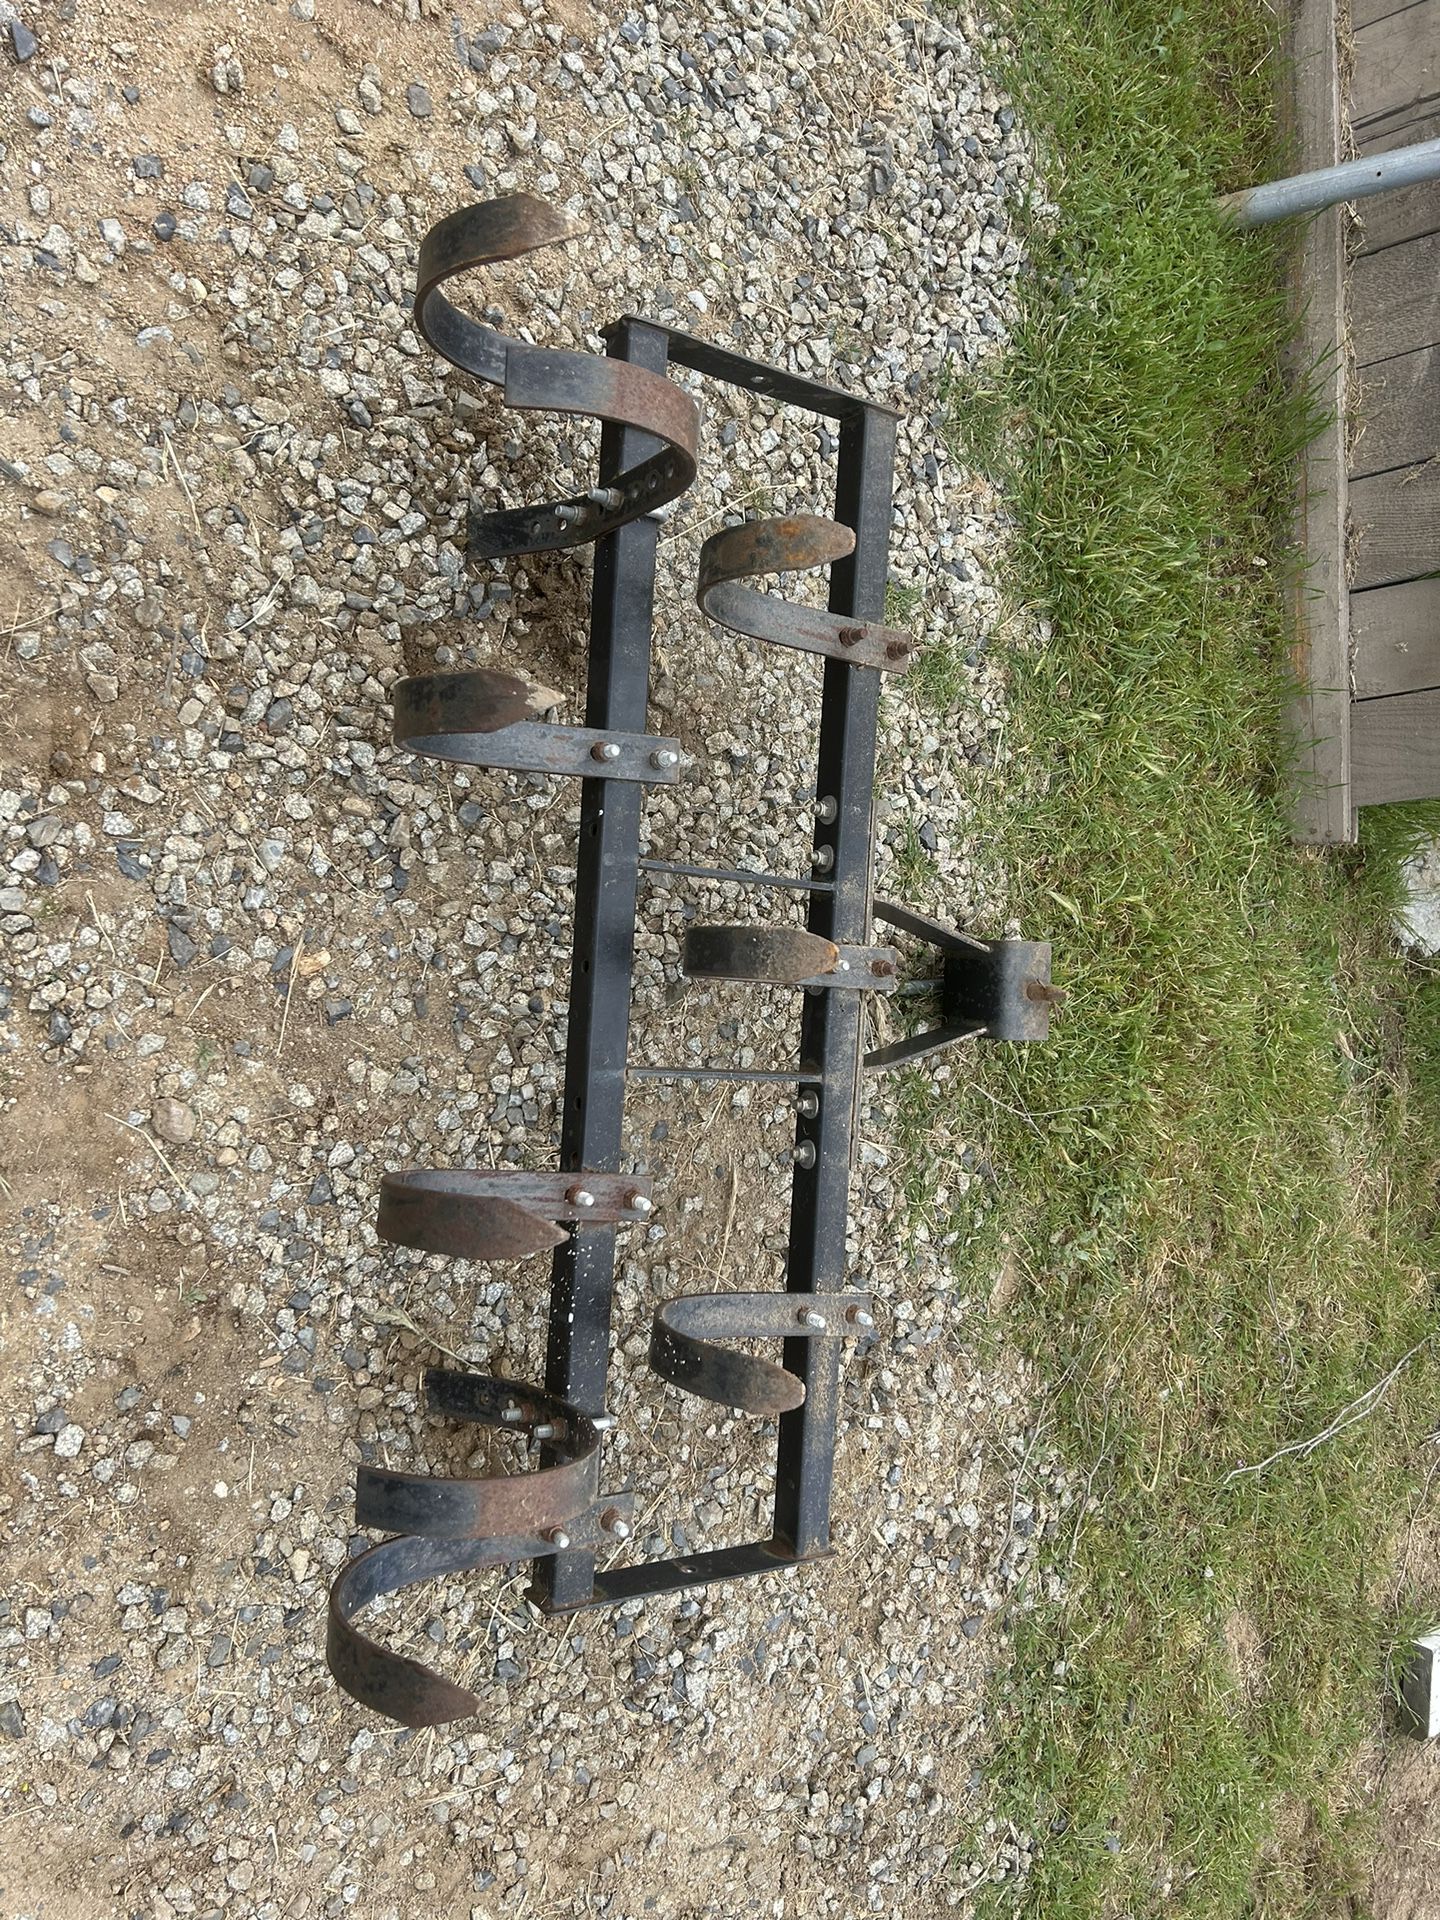 Lawn Tractor Implement And More.